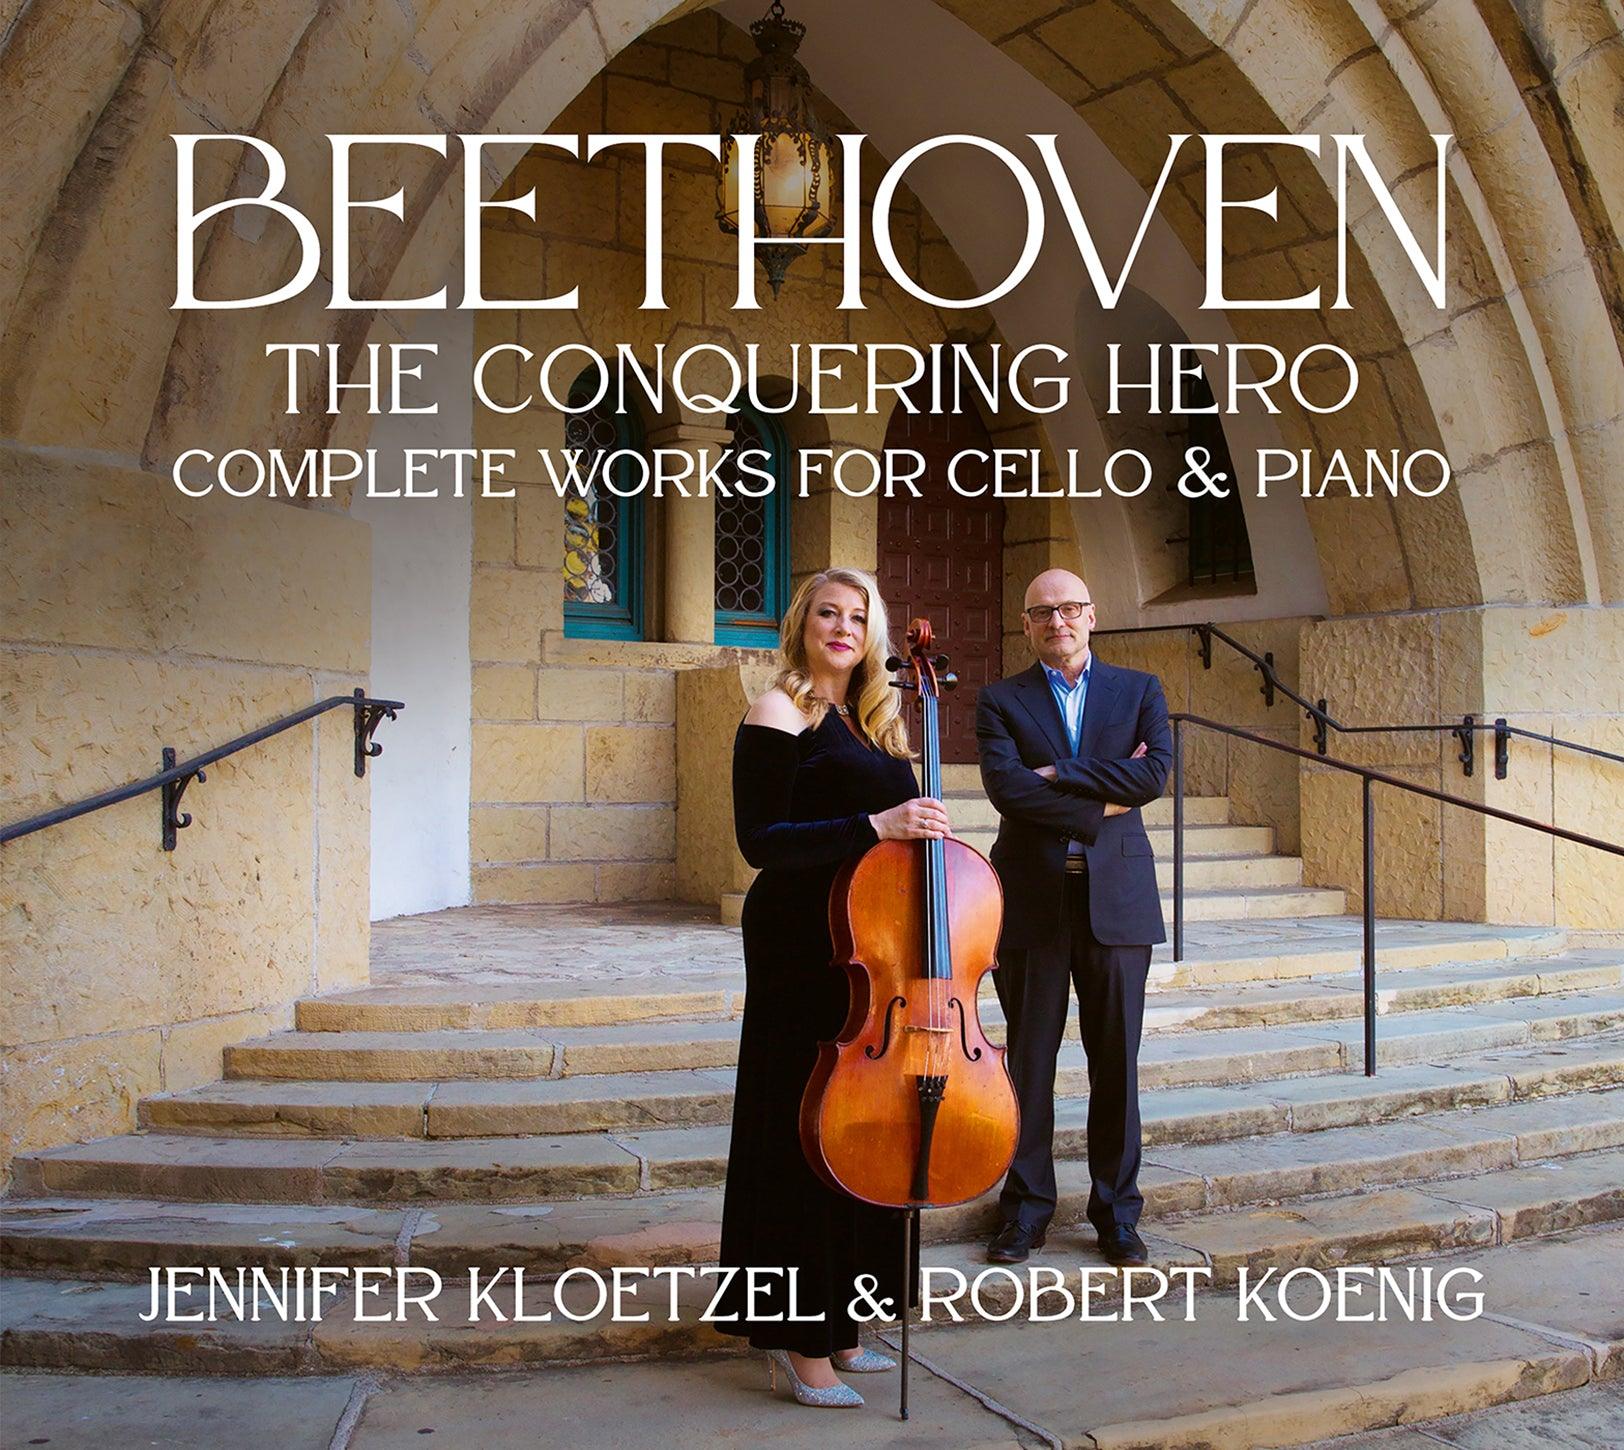 Beethoven: The Conquering Hero - Complete Works for Cello and Piano / Kloetzel, Koenig - ArkivMusic